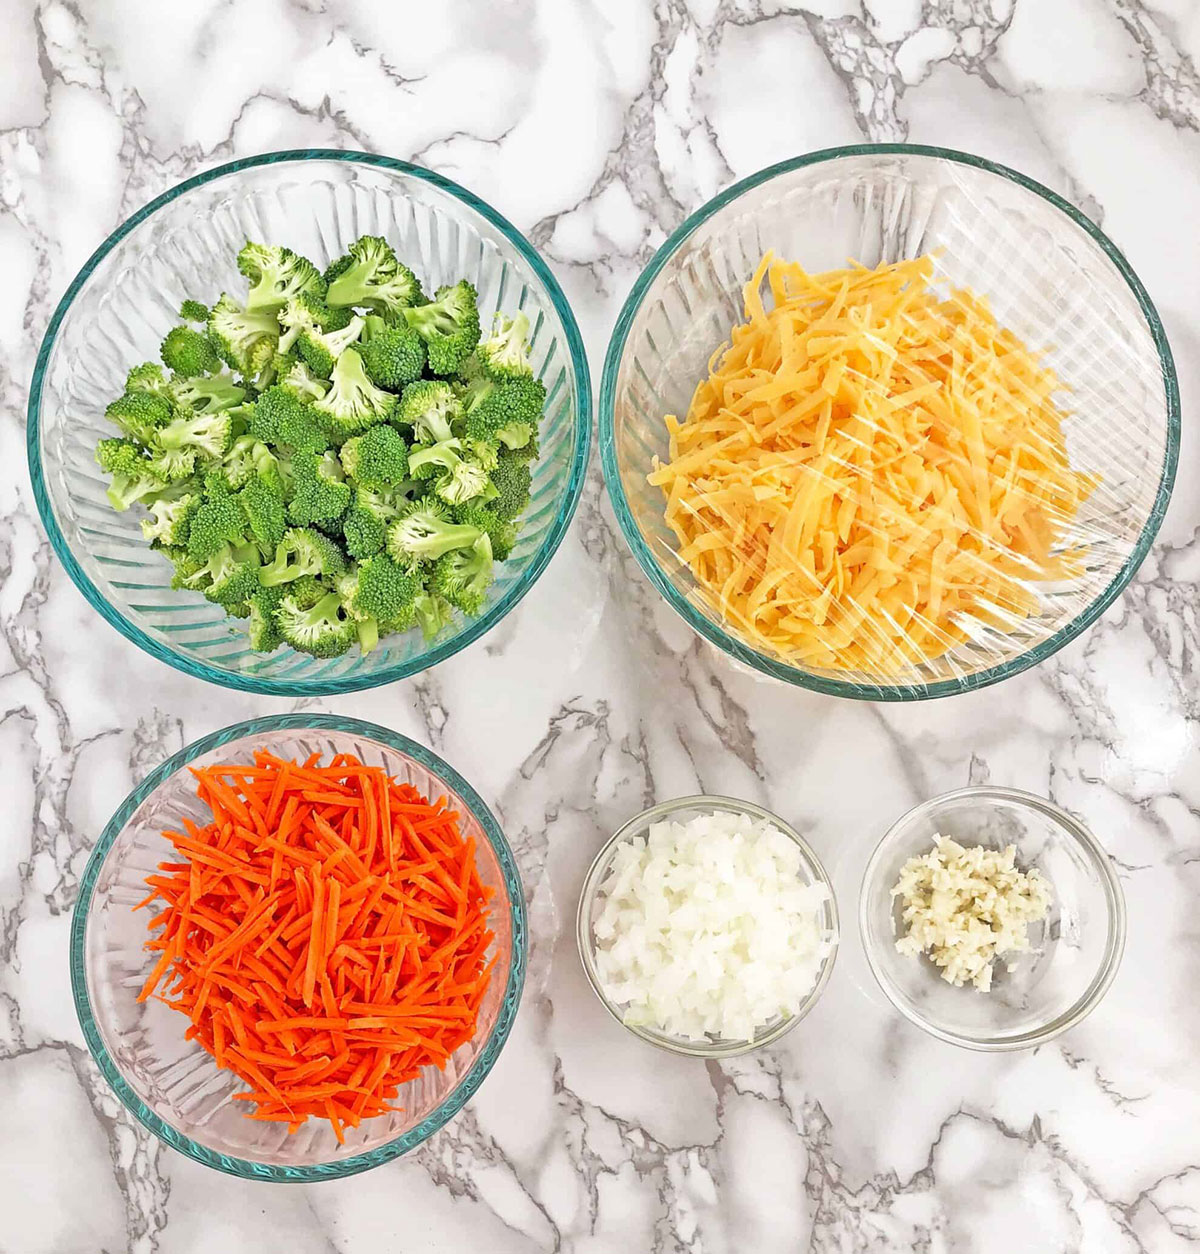 Cut the broccoli into florets that are about bite-sized pieces, grate the carrots, and shred the cheese. Place them all in bowls and cover them all with plastic wrap. 